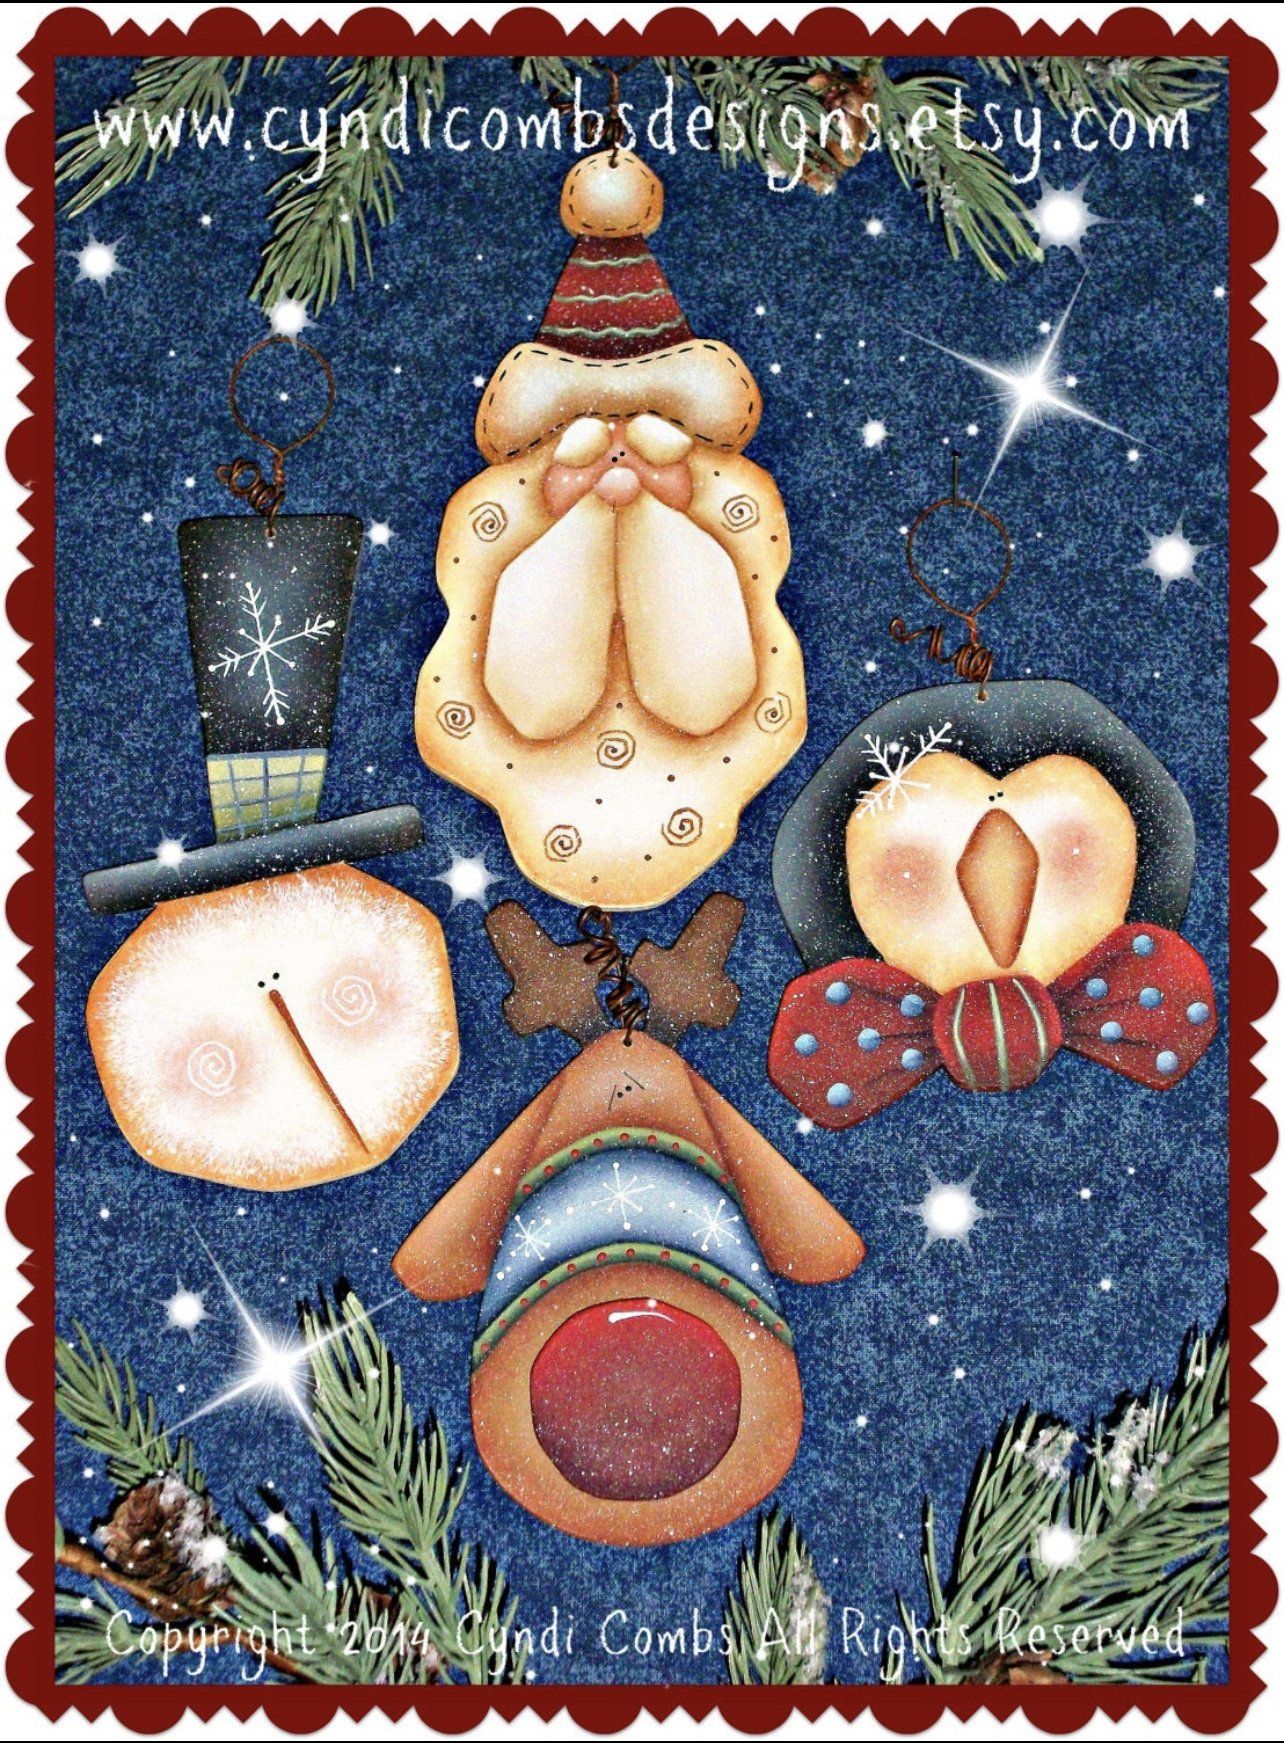 Kit 4 pz Santa and friends ornaments (sagome in legno) - Out of the Wood